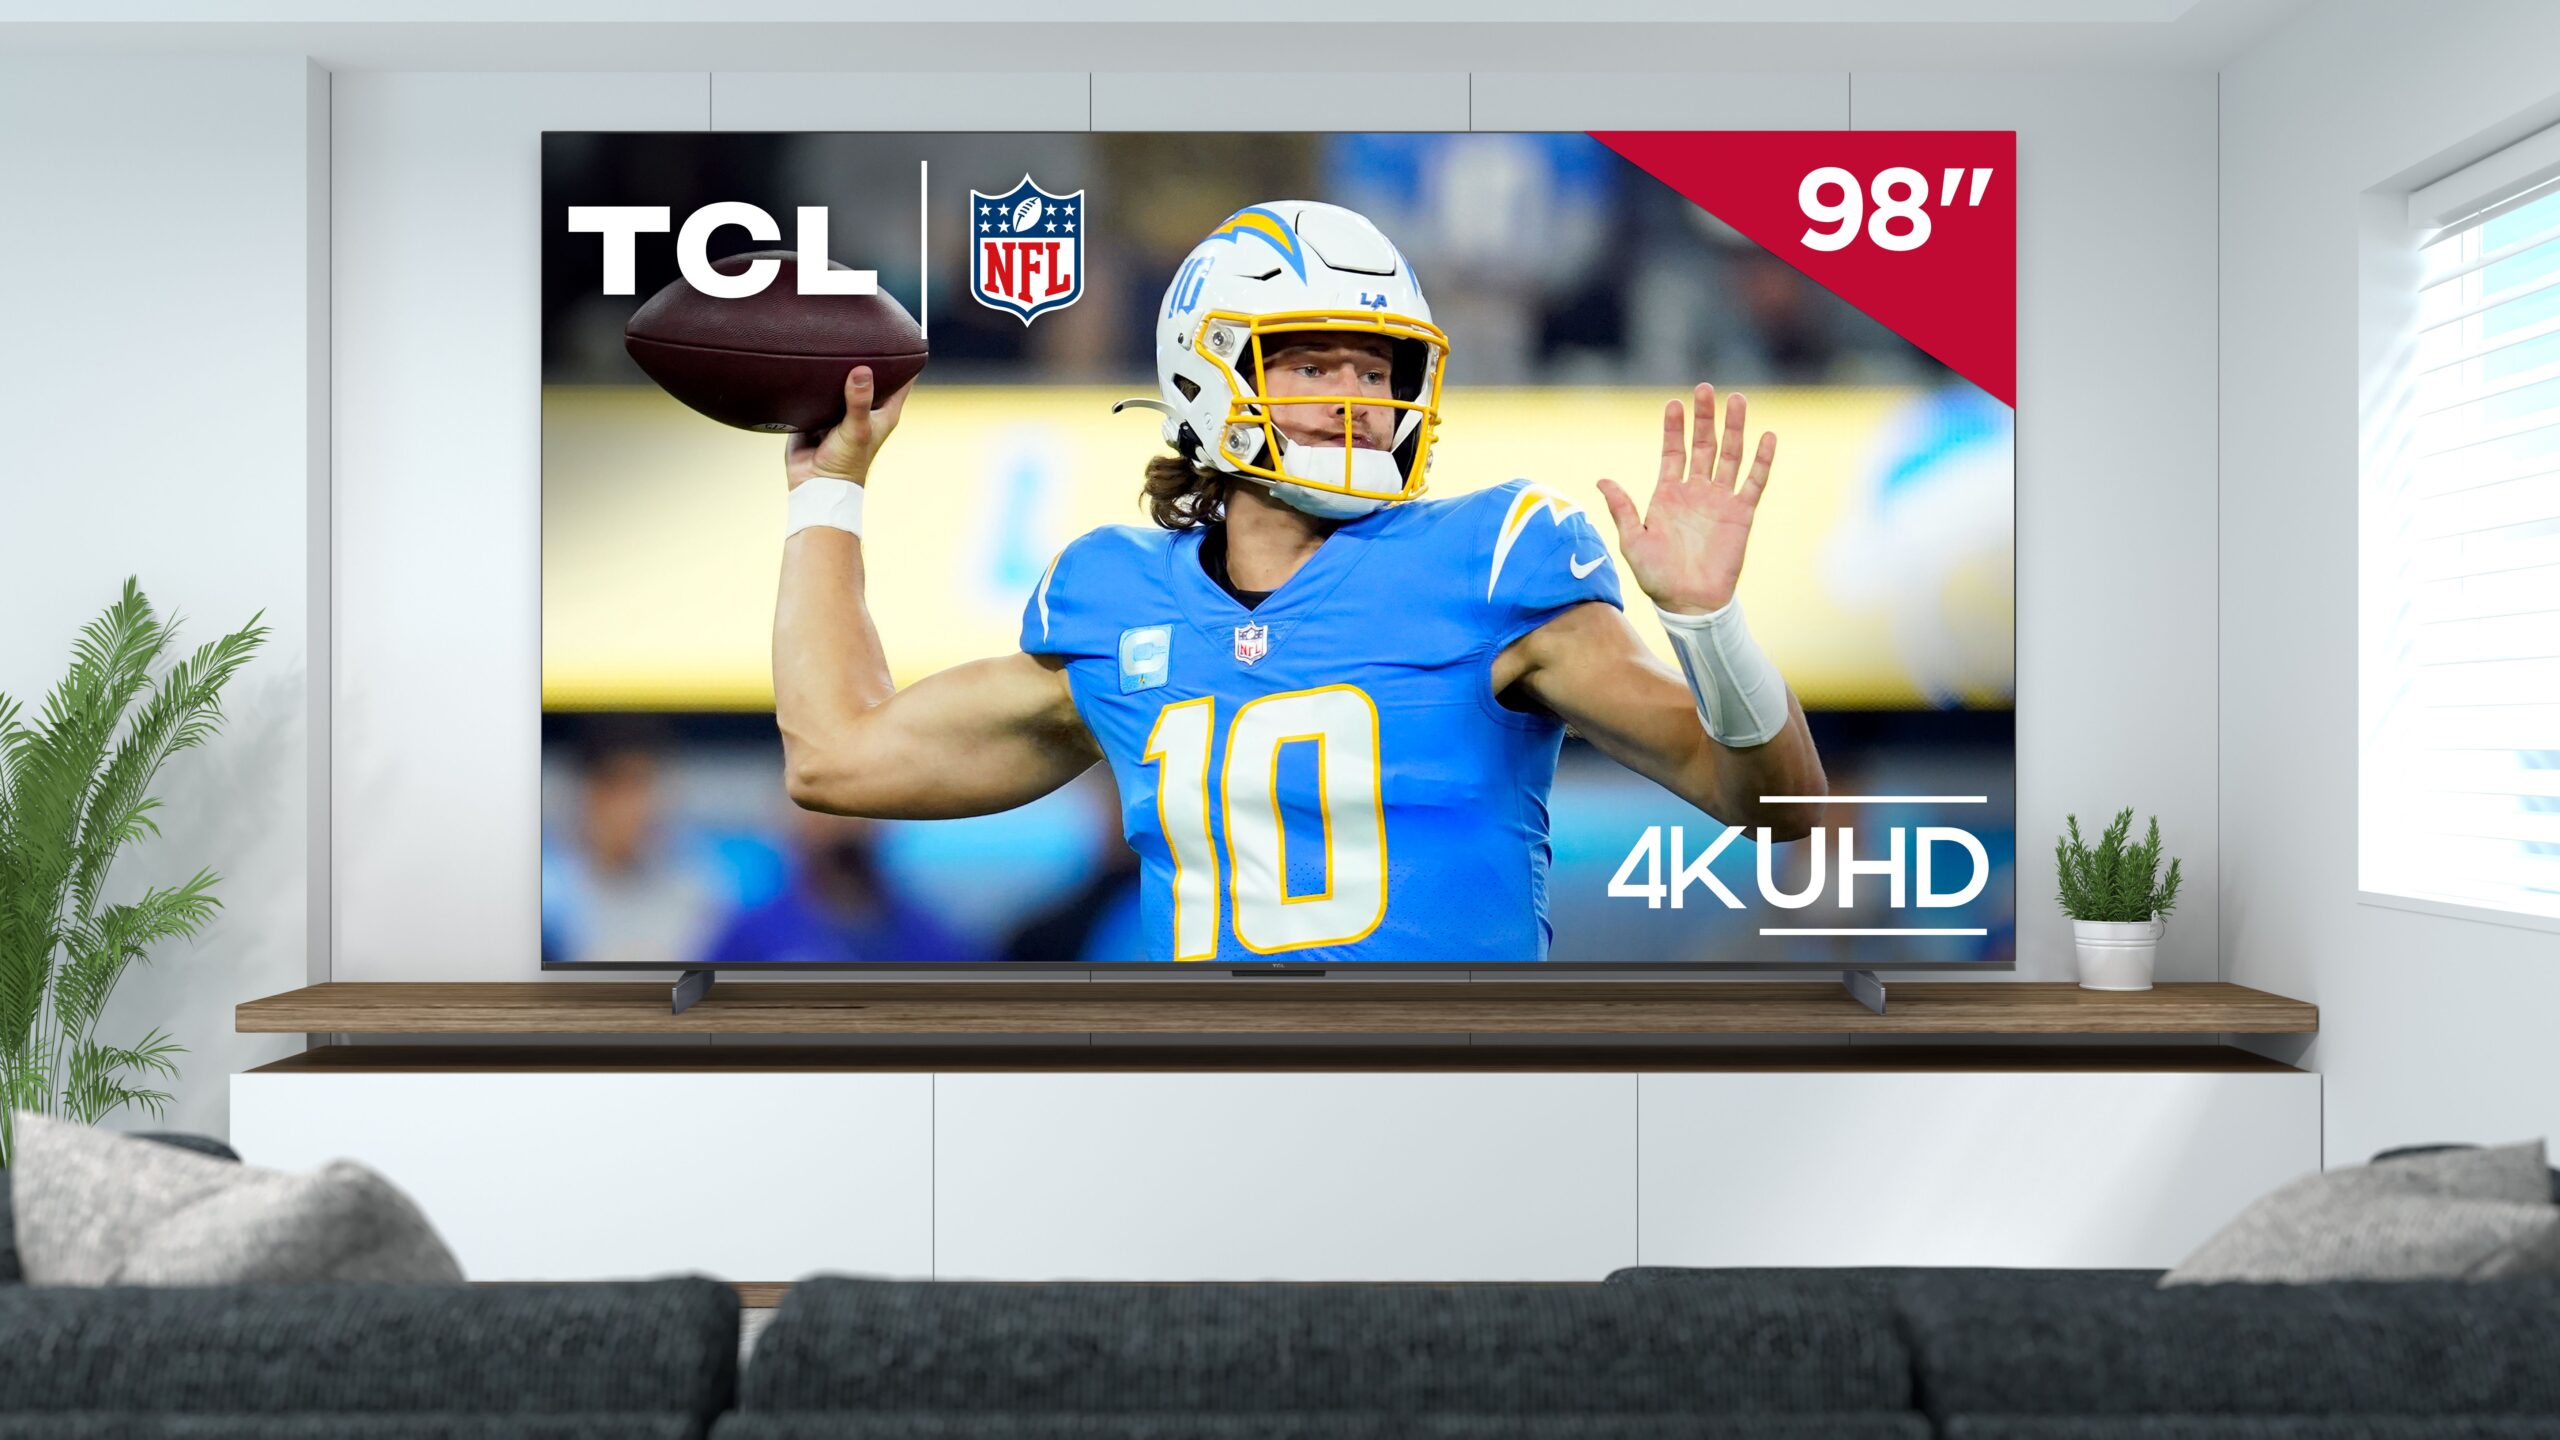 Score up to 50% savings on TCL’s 98-inch S5 Series 4K behemoth and more